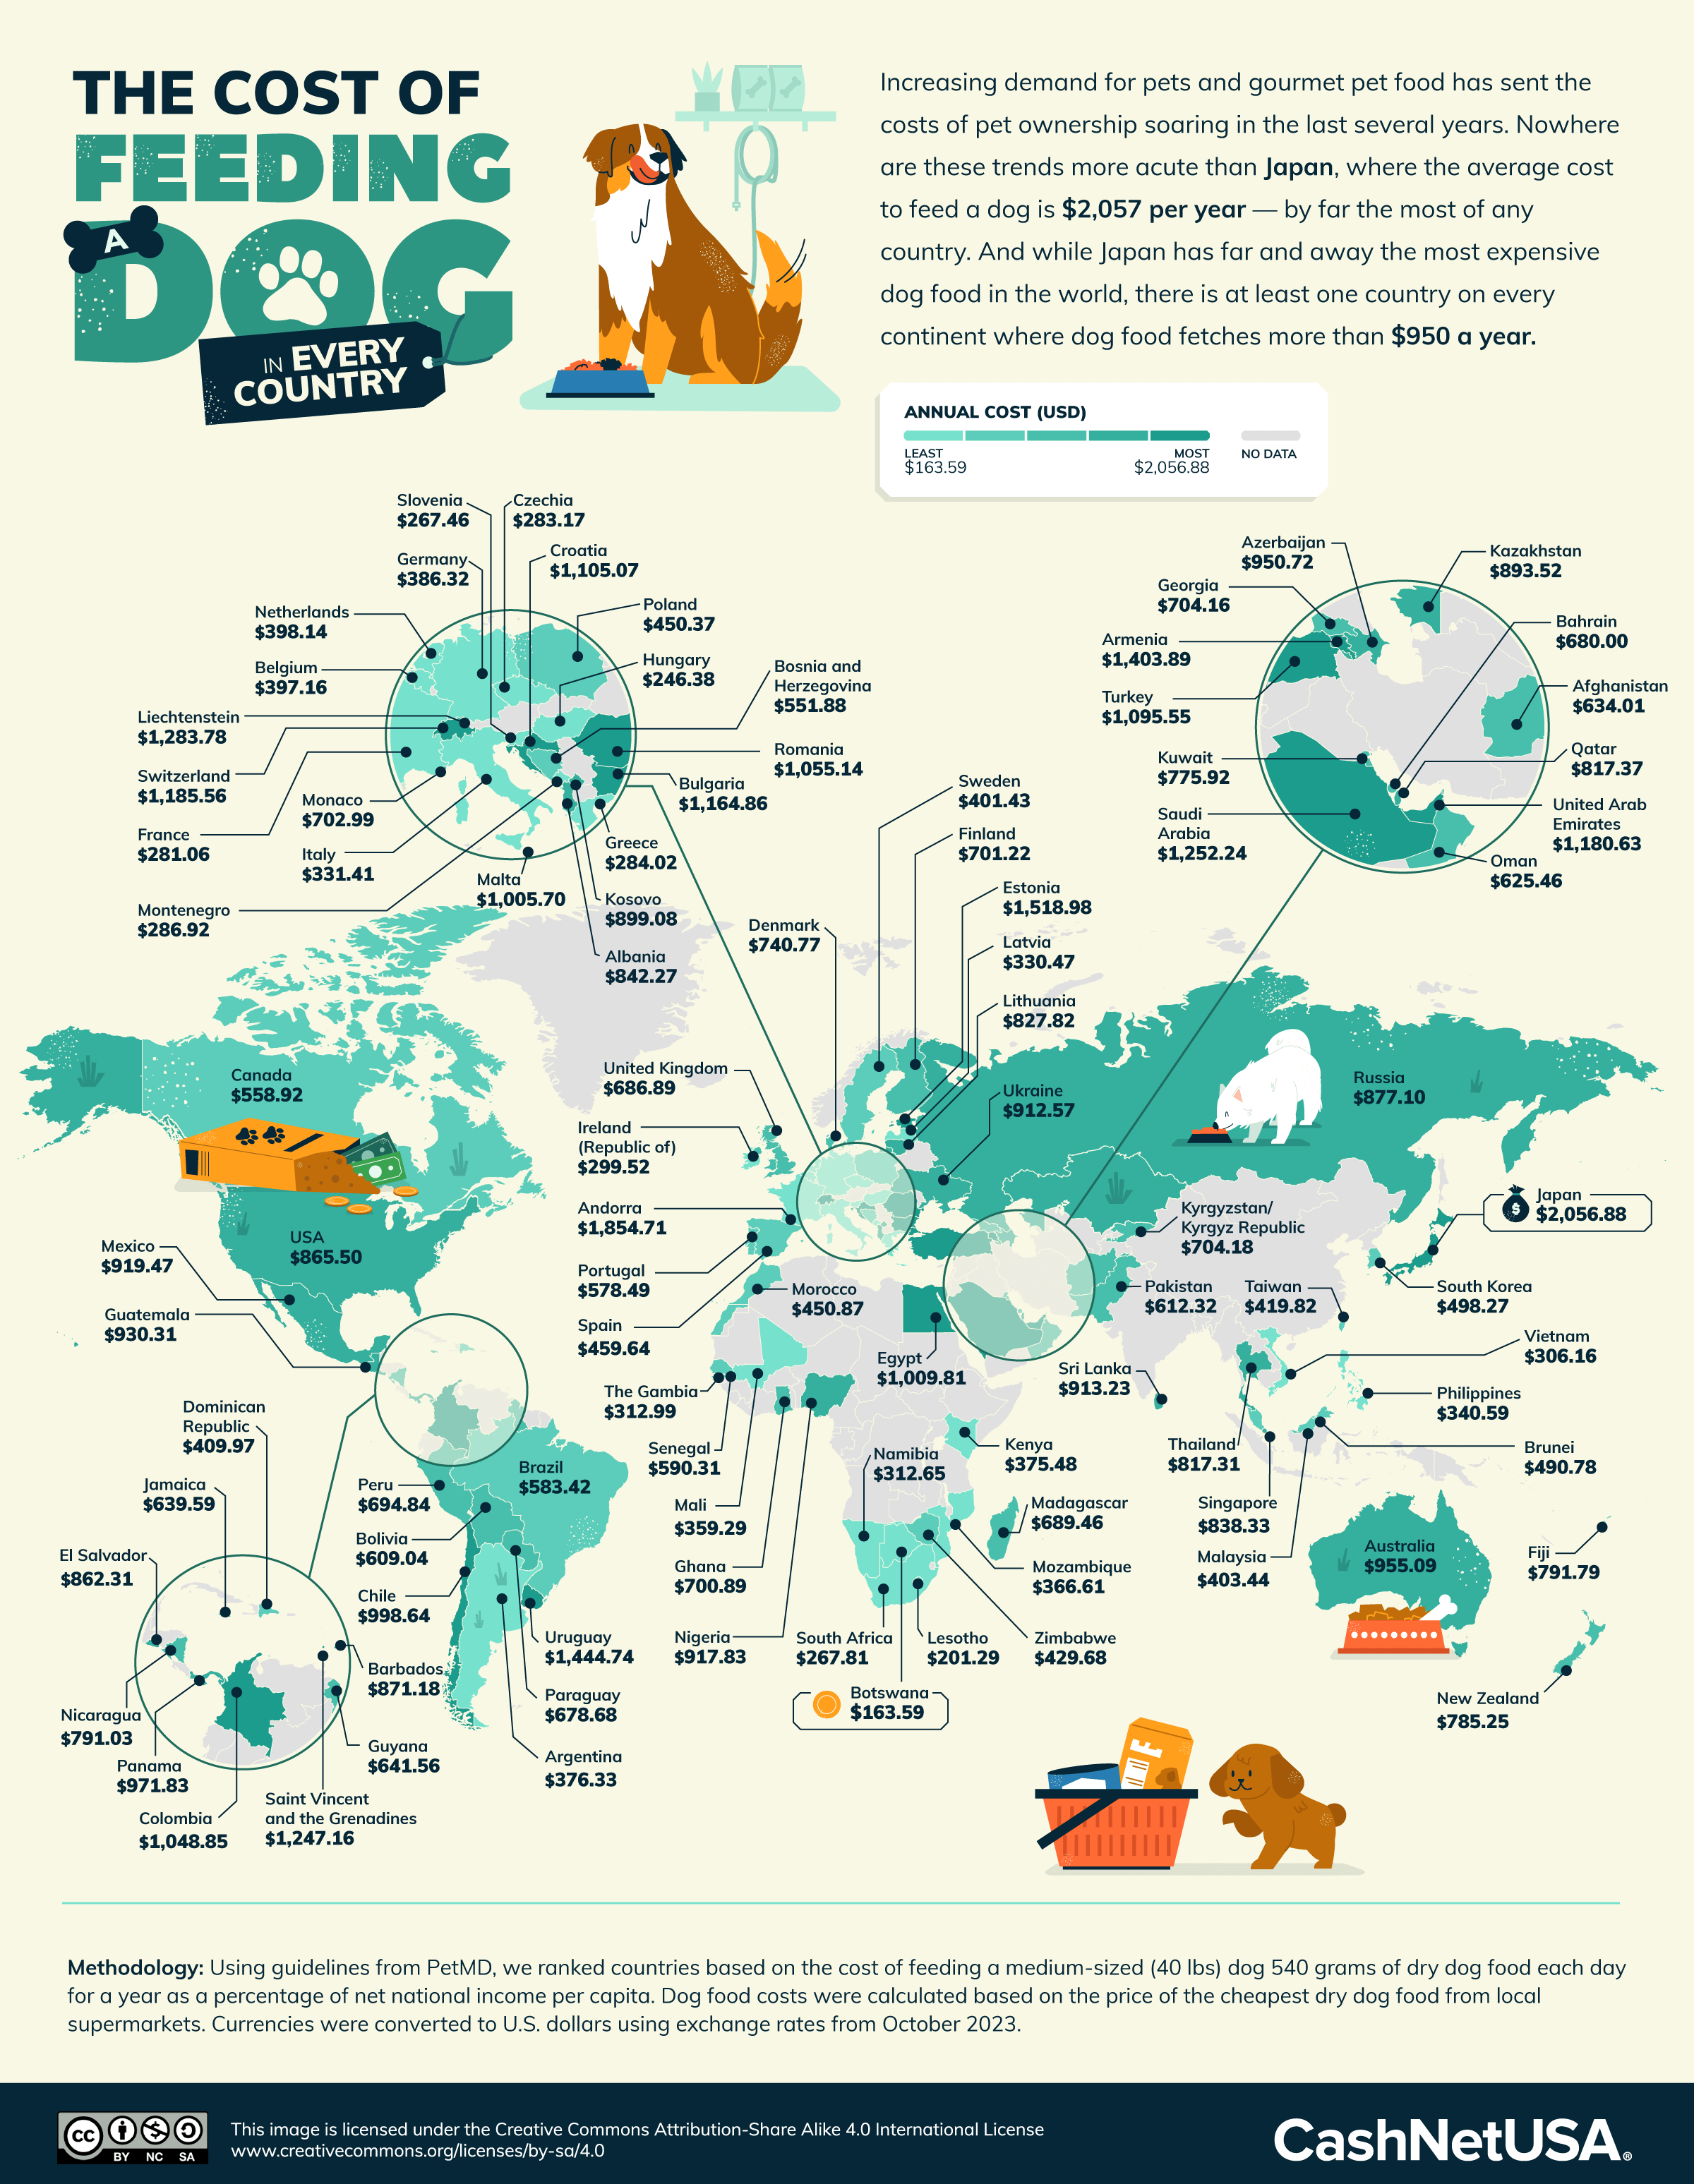 Infographic of a map that shows the cost of feeding a dog per country.